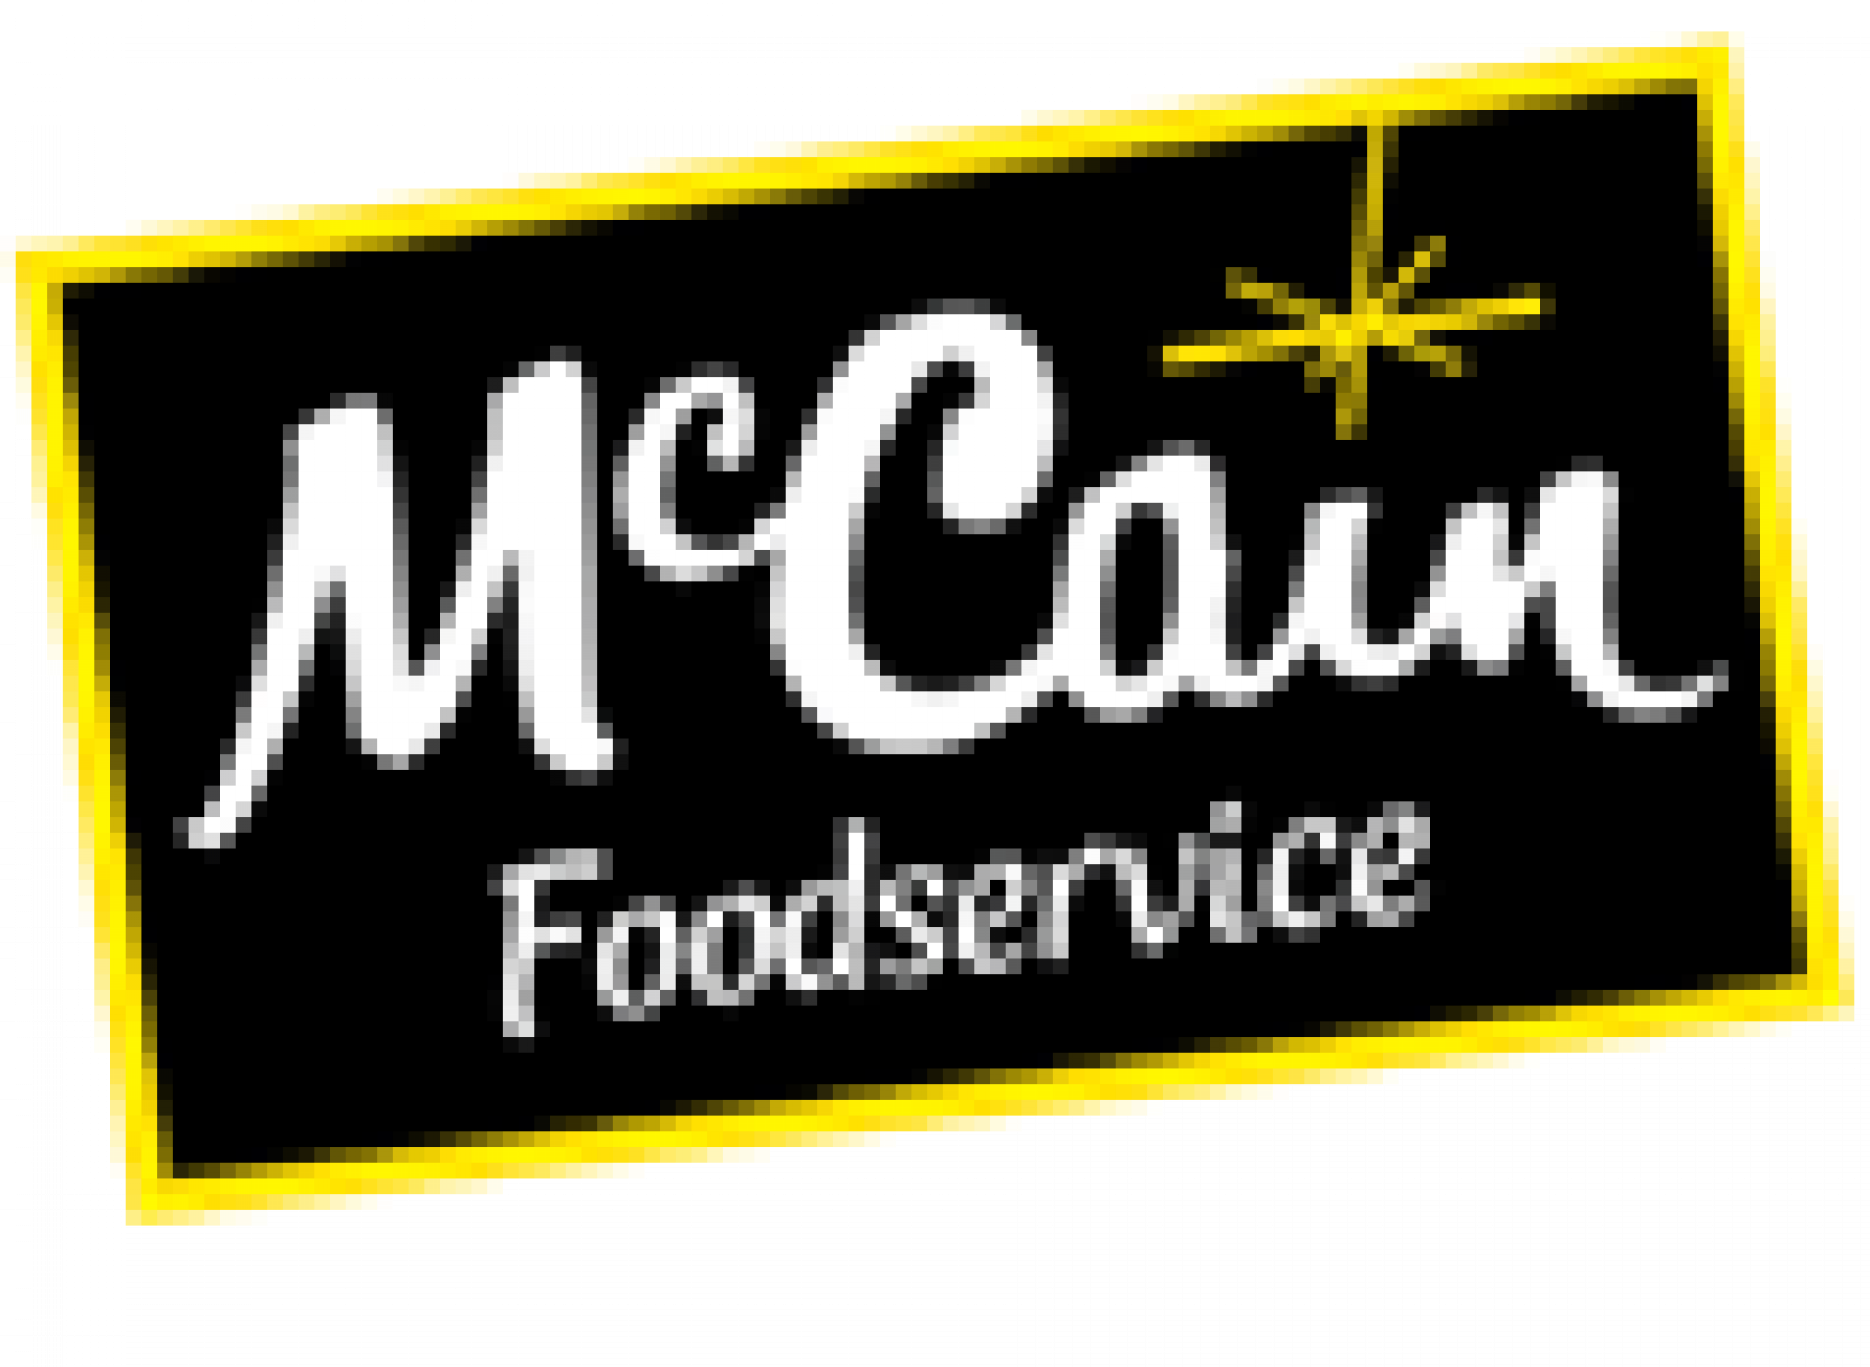 McCain Foods wants you to share your best chef hack